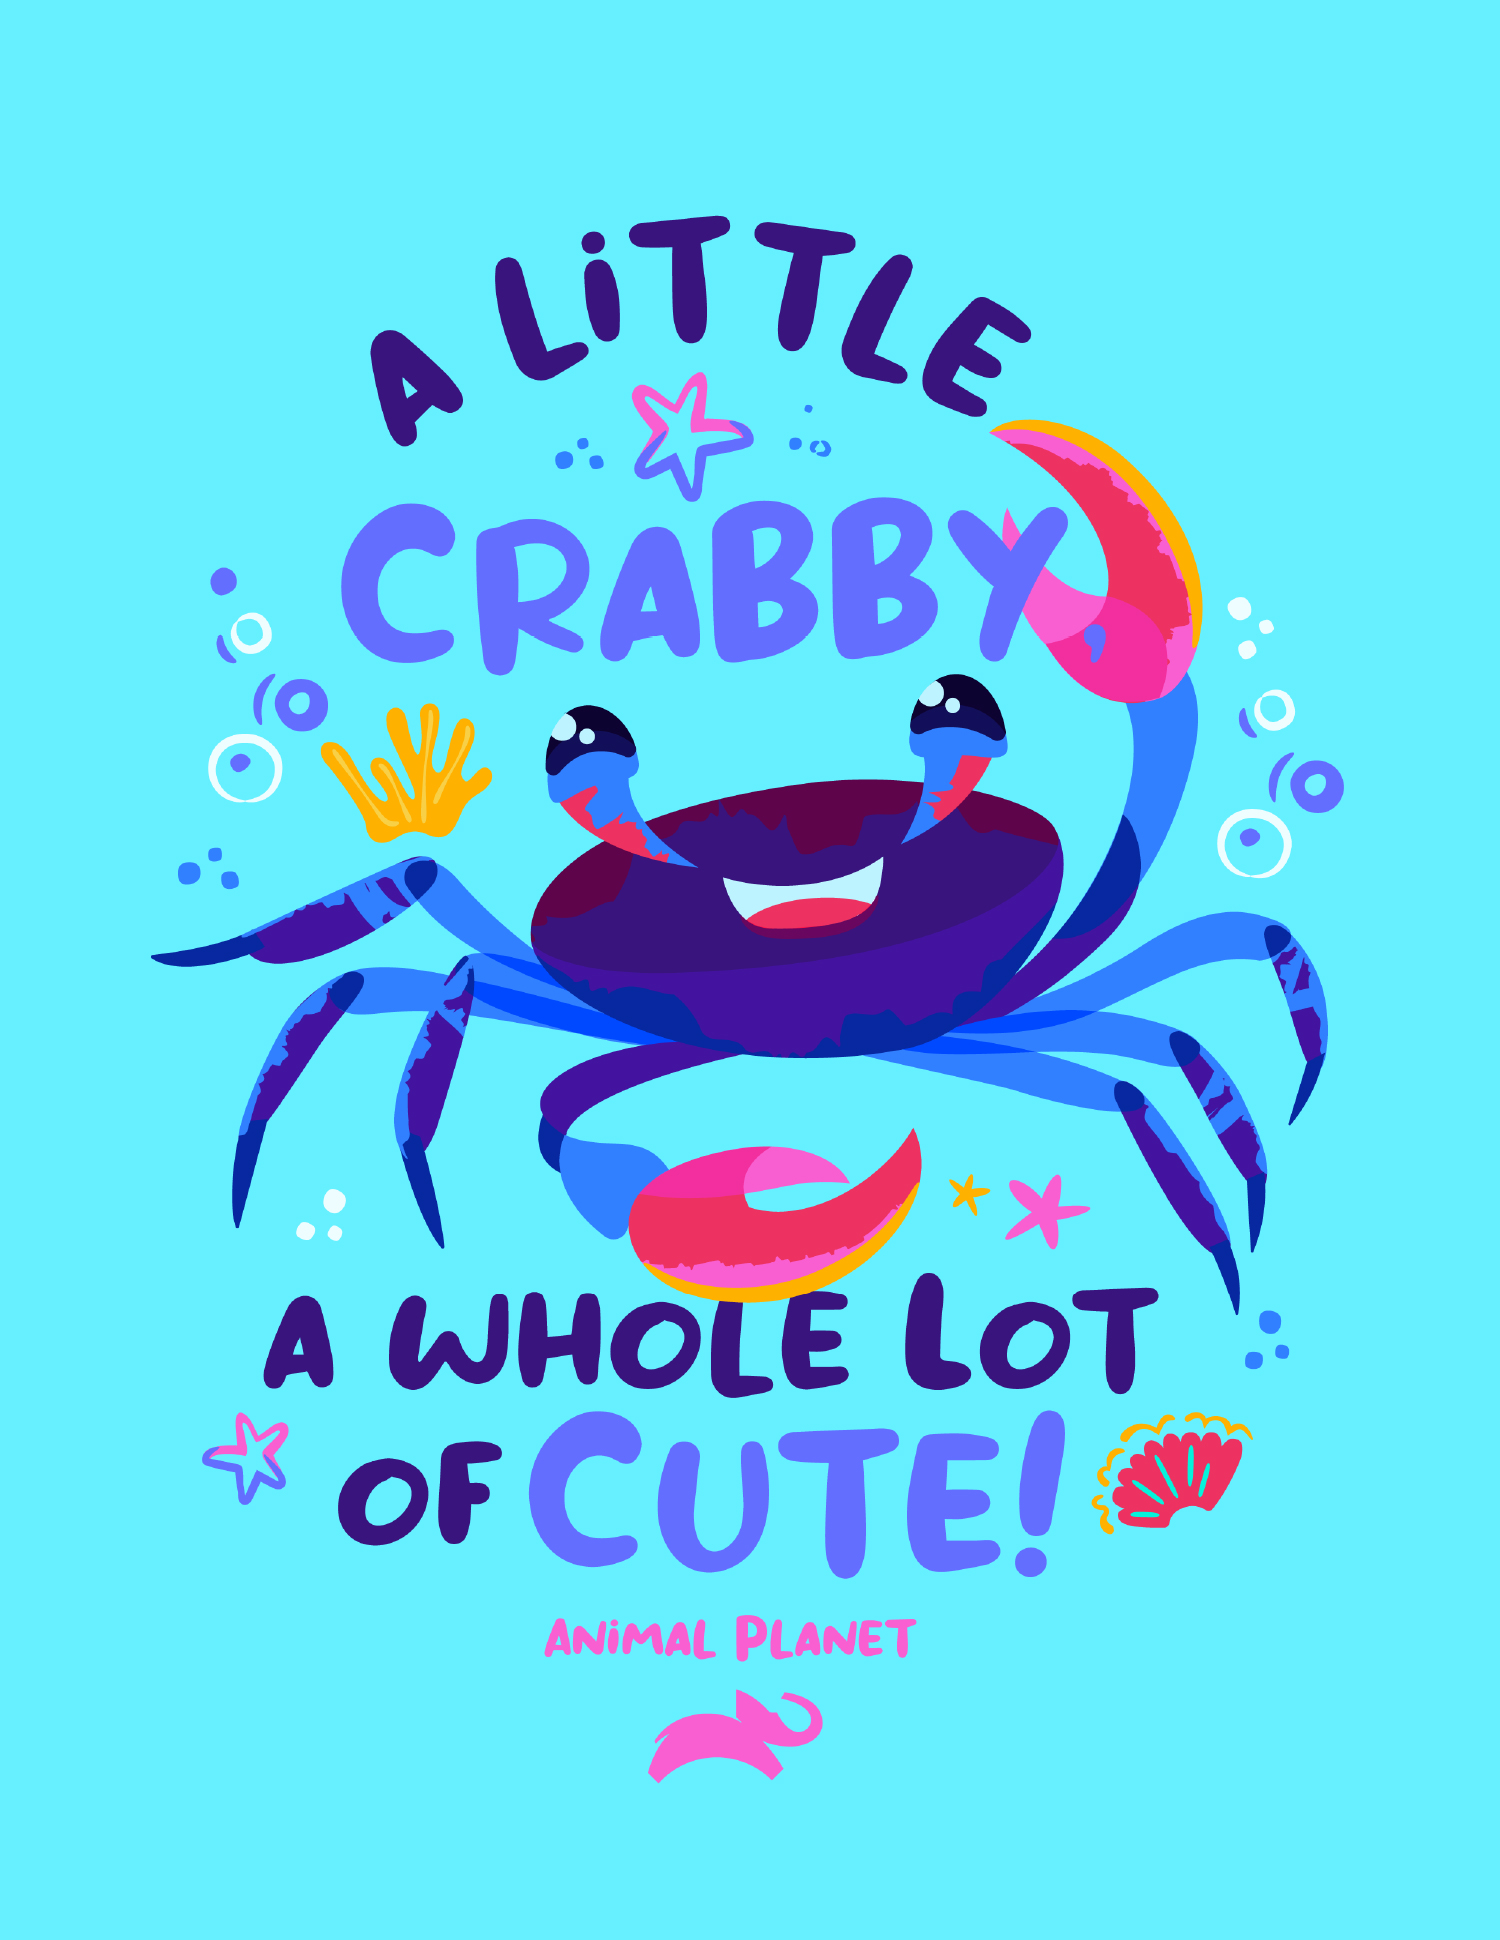 Composed design featuring character art of crab and saying: "A Little Crabby, a Whole Lot of Cute!"